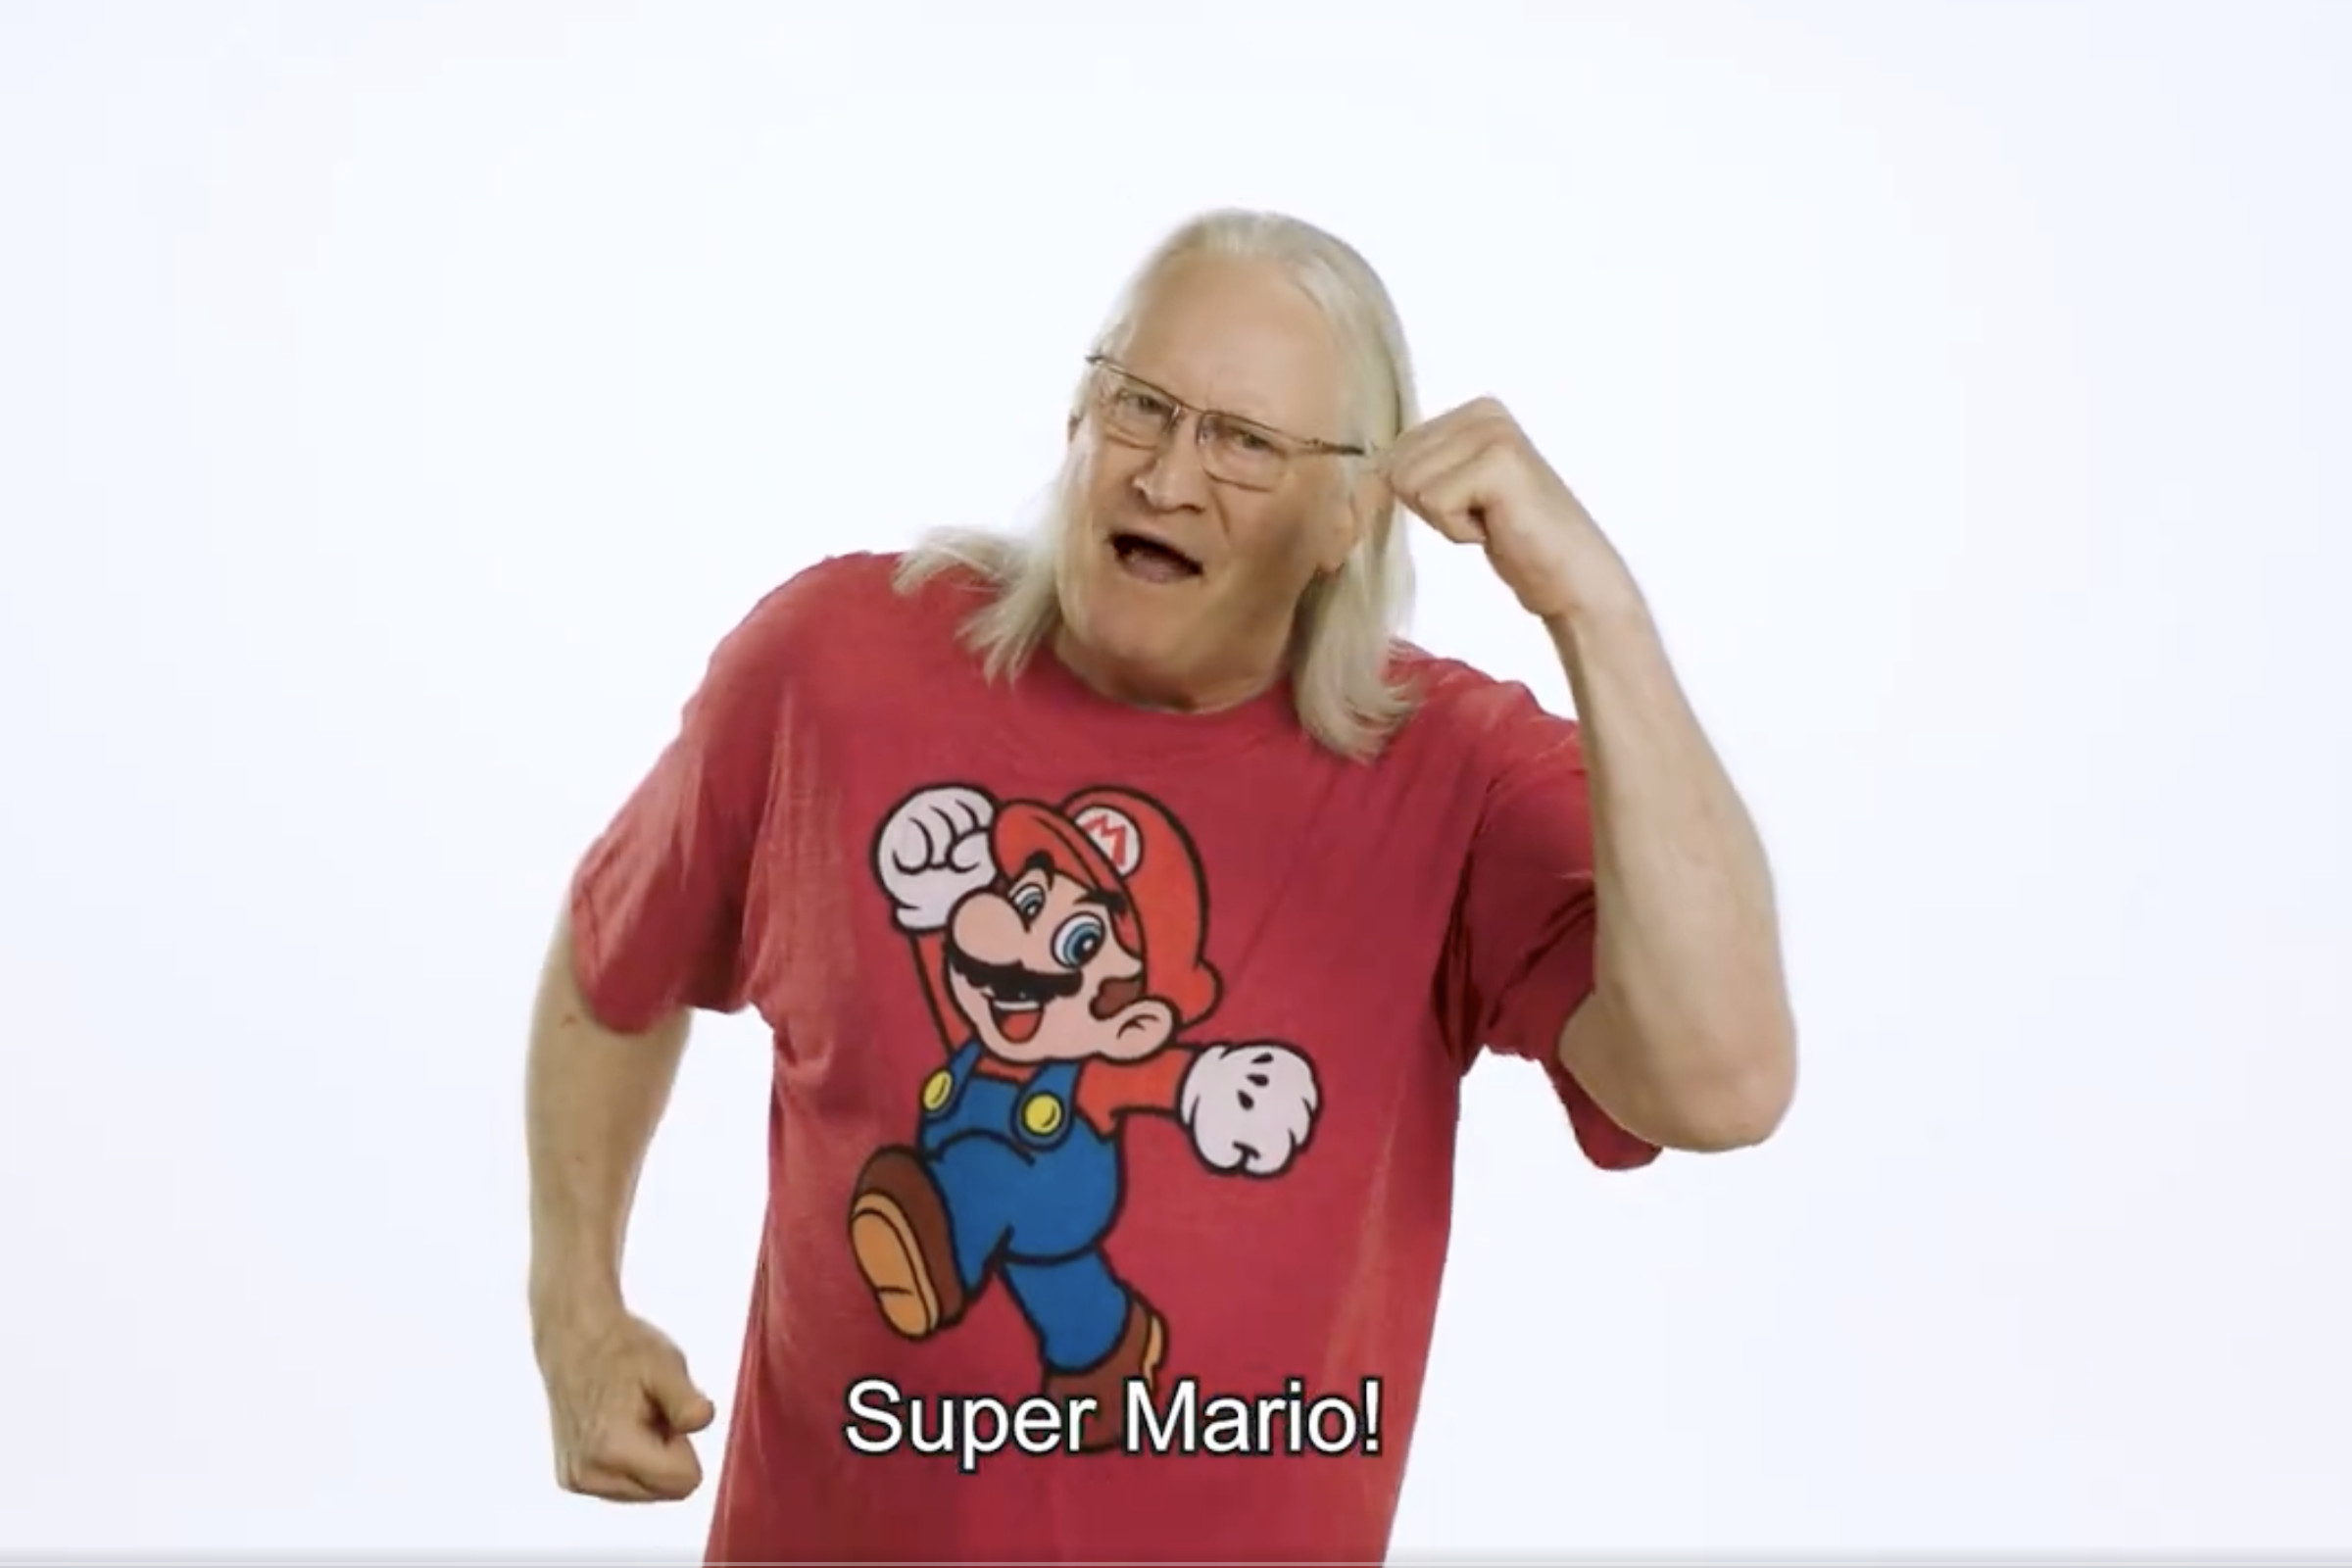 Screenshot from a Nintendo video featuring Charles Martinet, an older Caucasian man wearing a red Mario shirt, holding up his arms in a running motion saying, “Super Mario.”